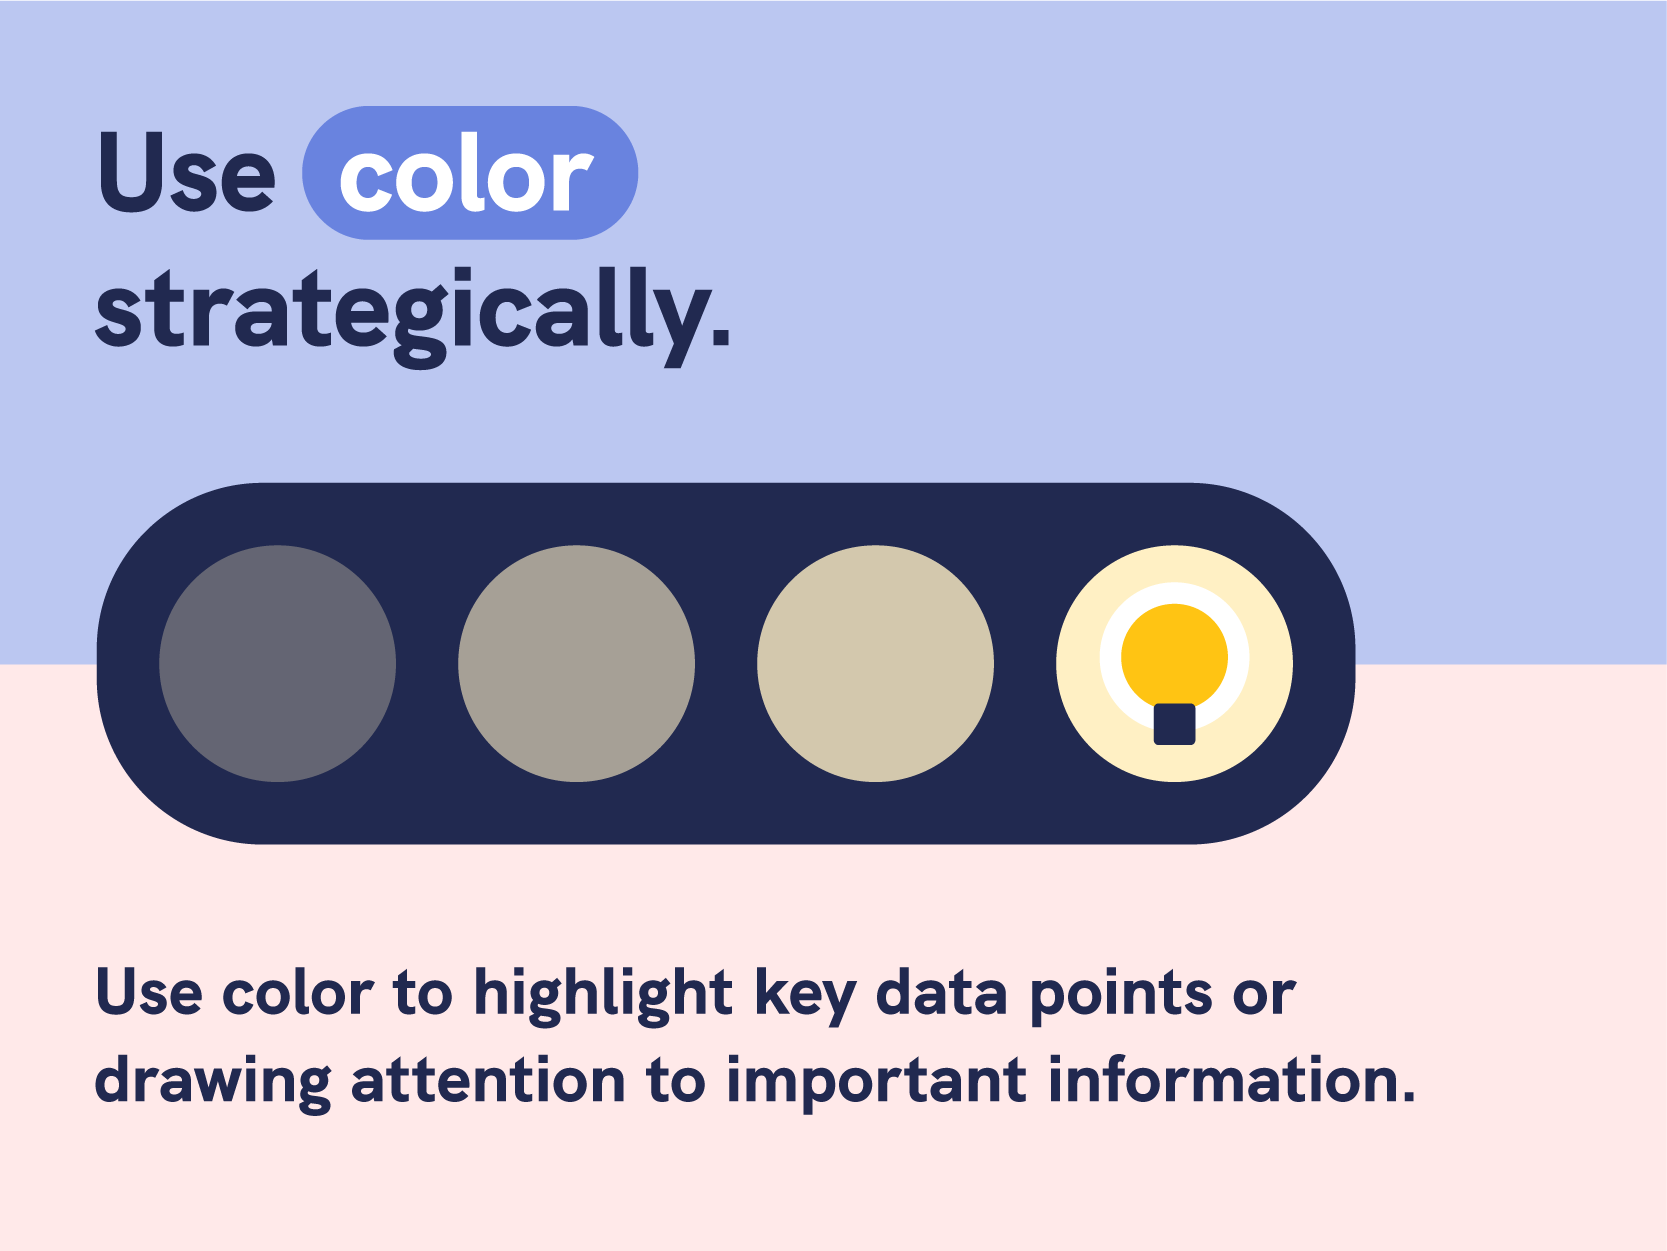 use color to draw attention to important information